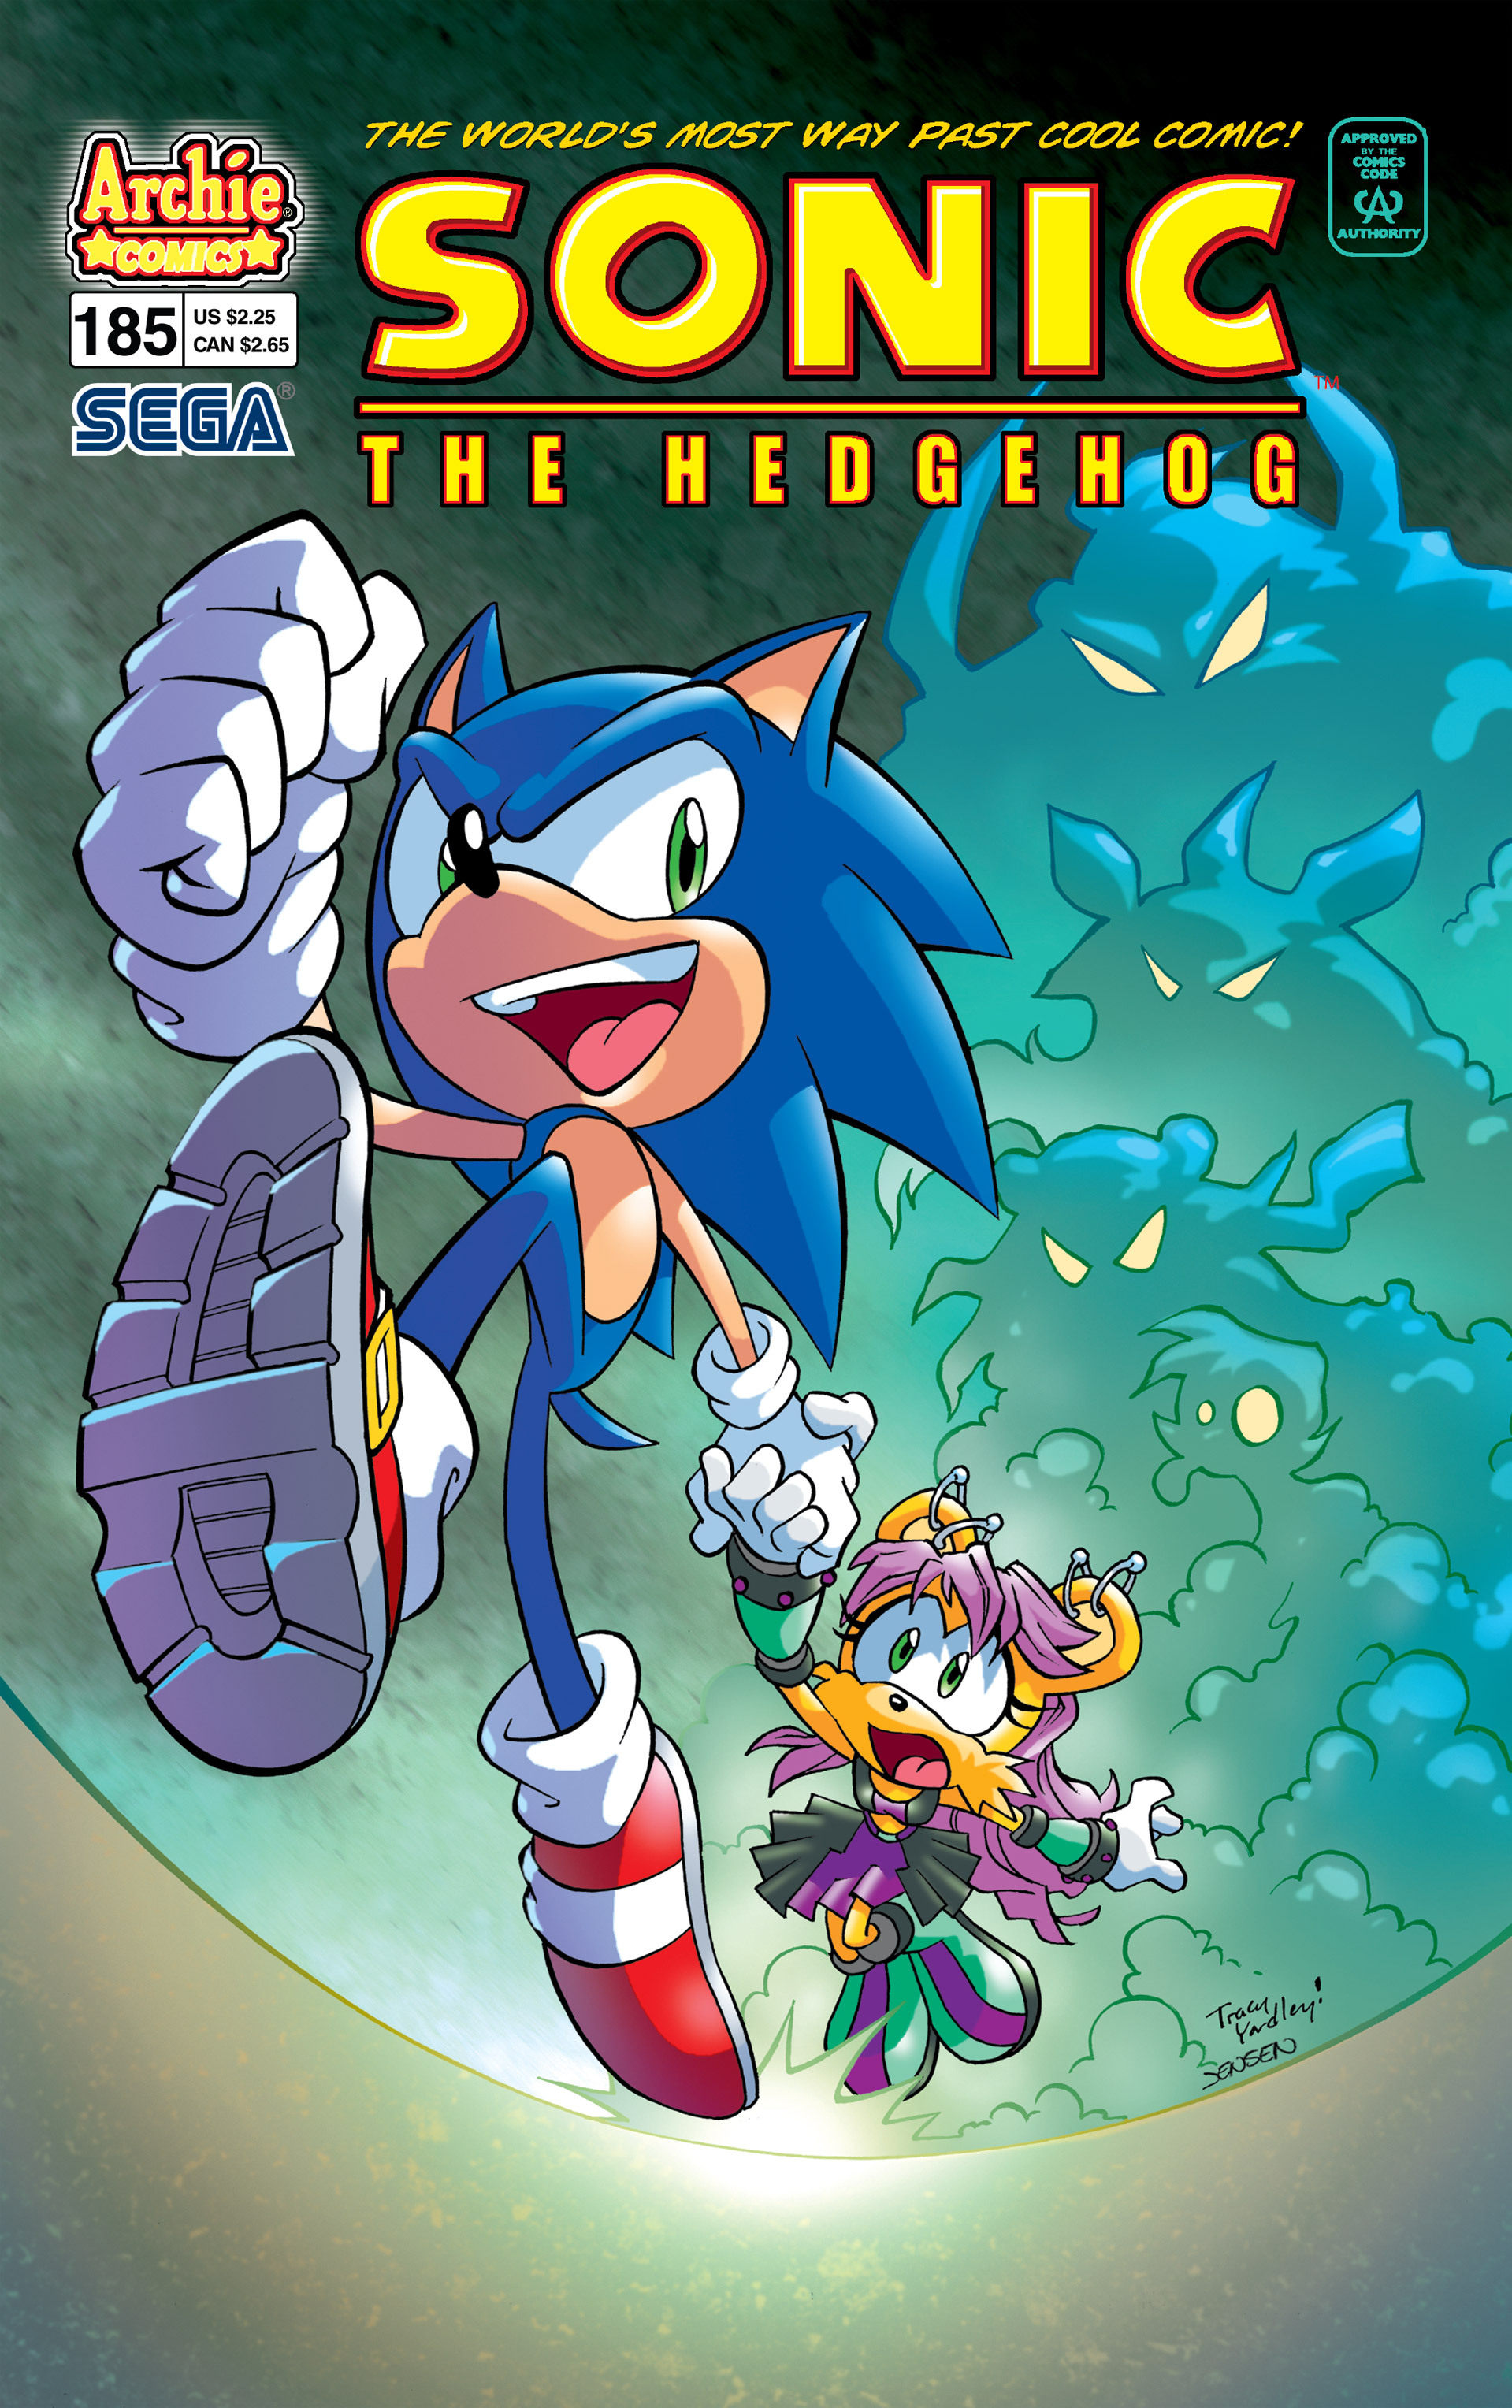 Archie Sonic the Hedgehog Issue 185 | Sonic News Network | Fandom powered by Wikia